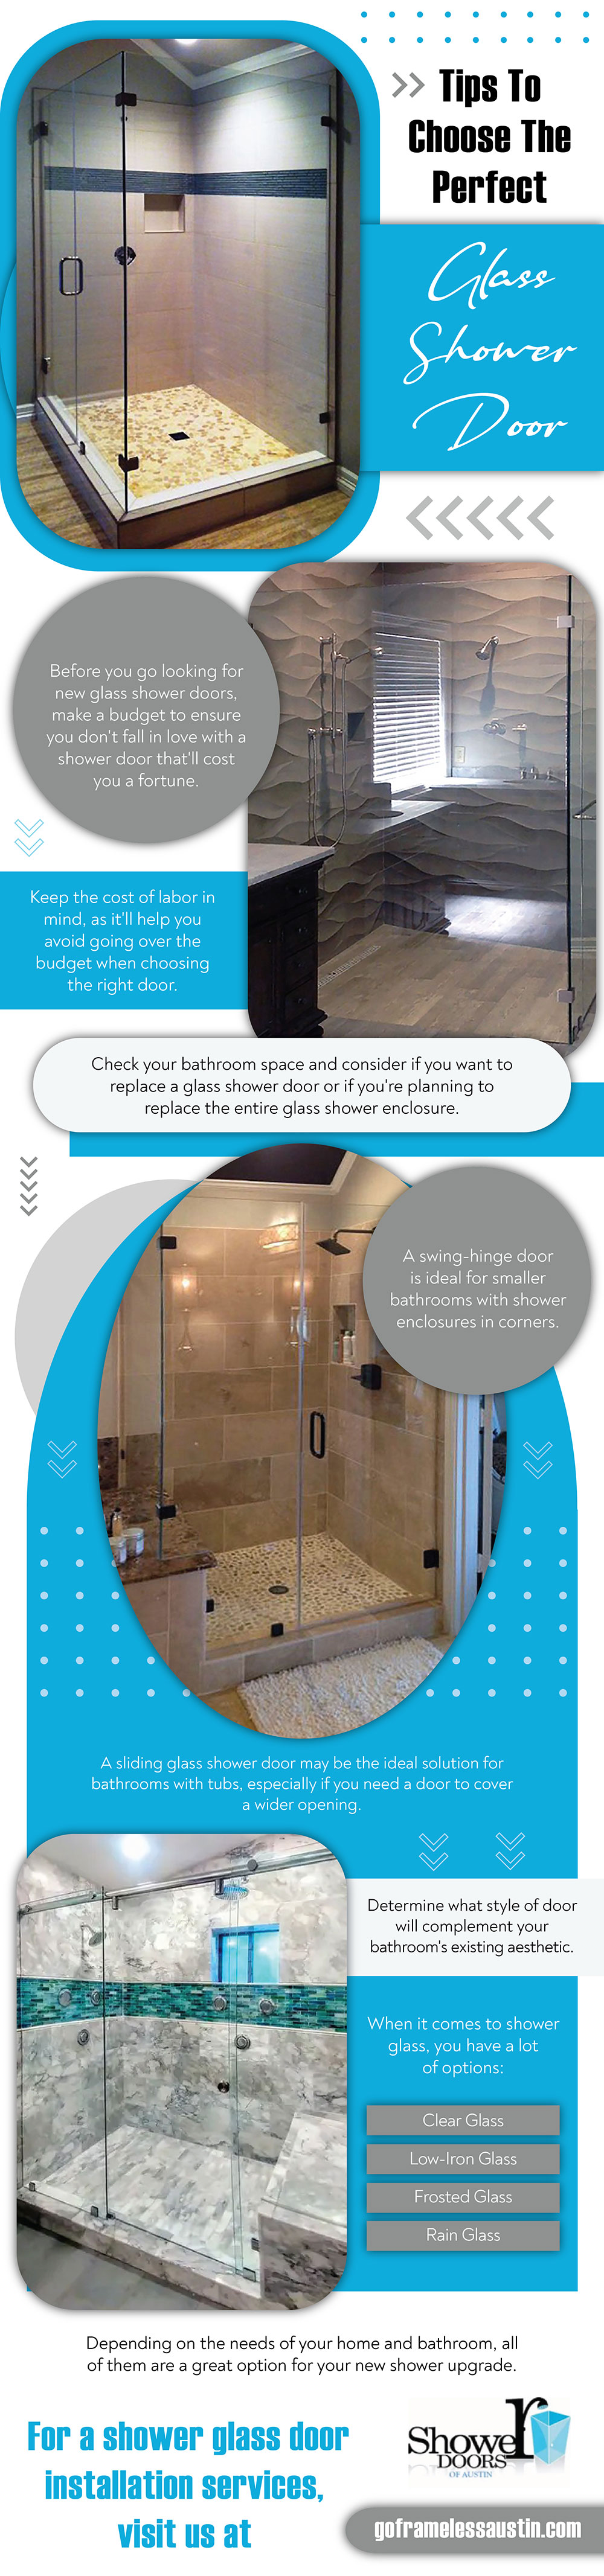 Tips to choose the perfect Glass Shower Door